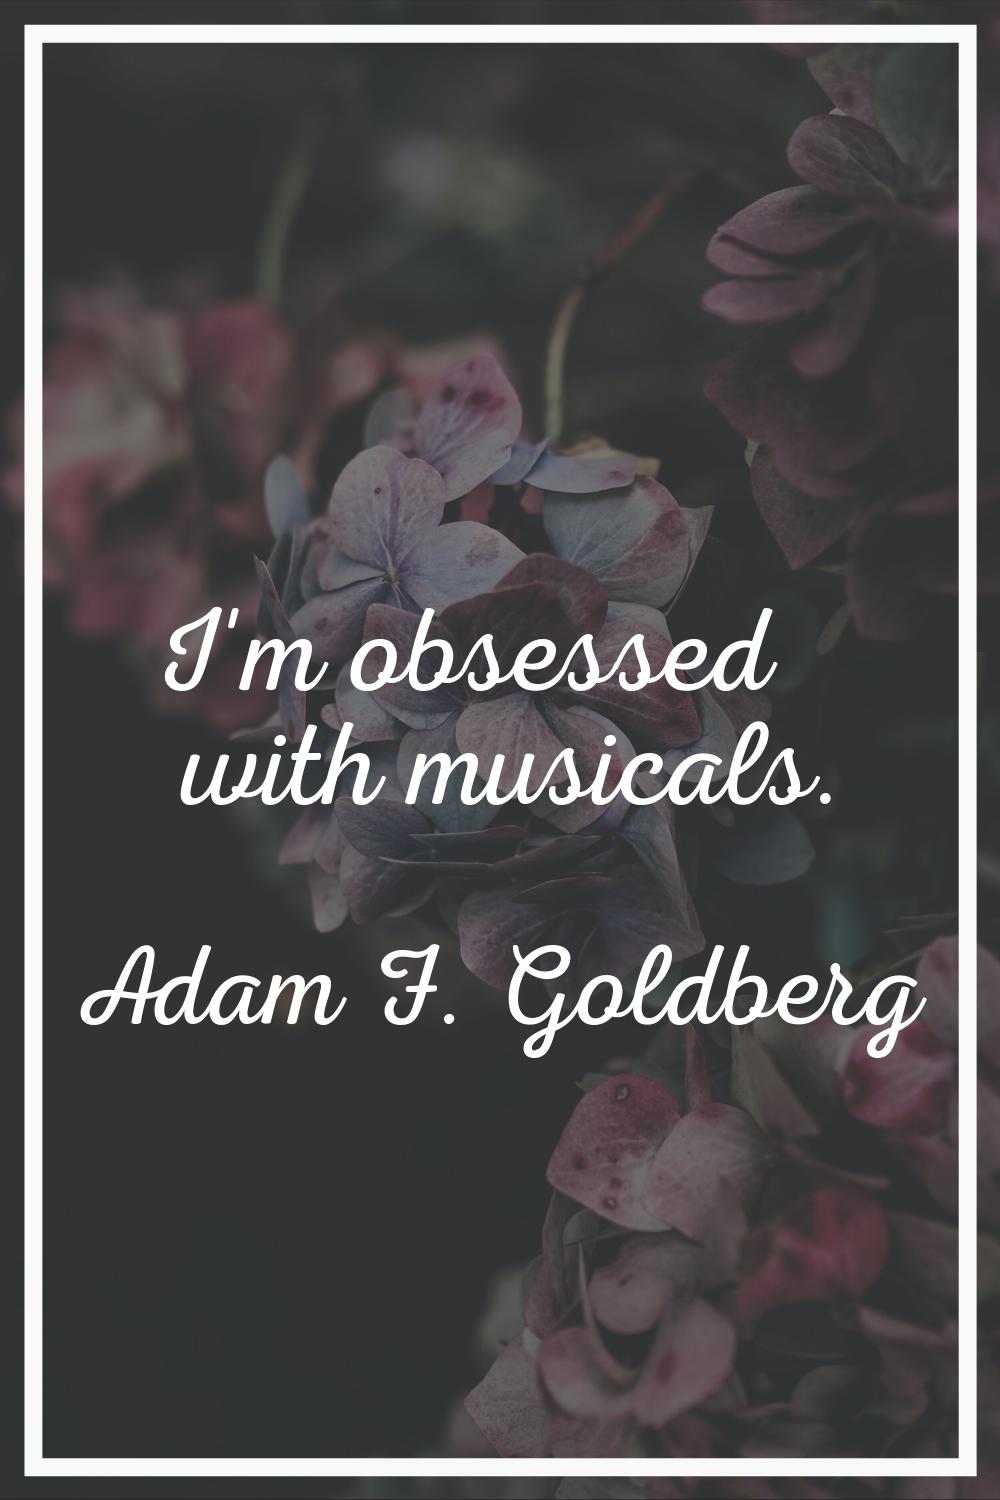 I'm obsessed with musicals.